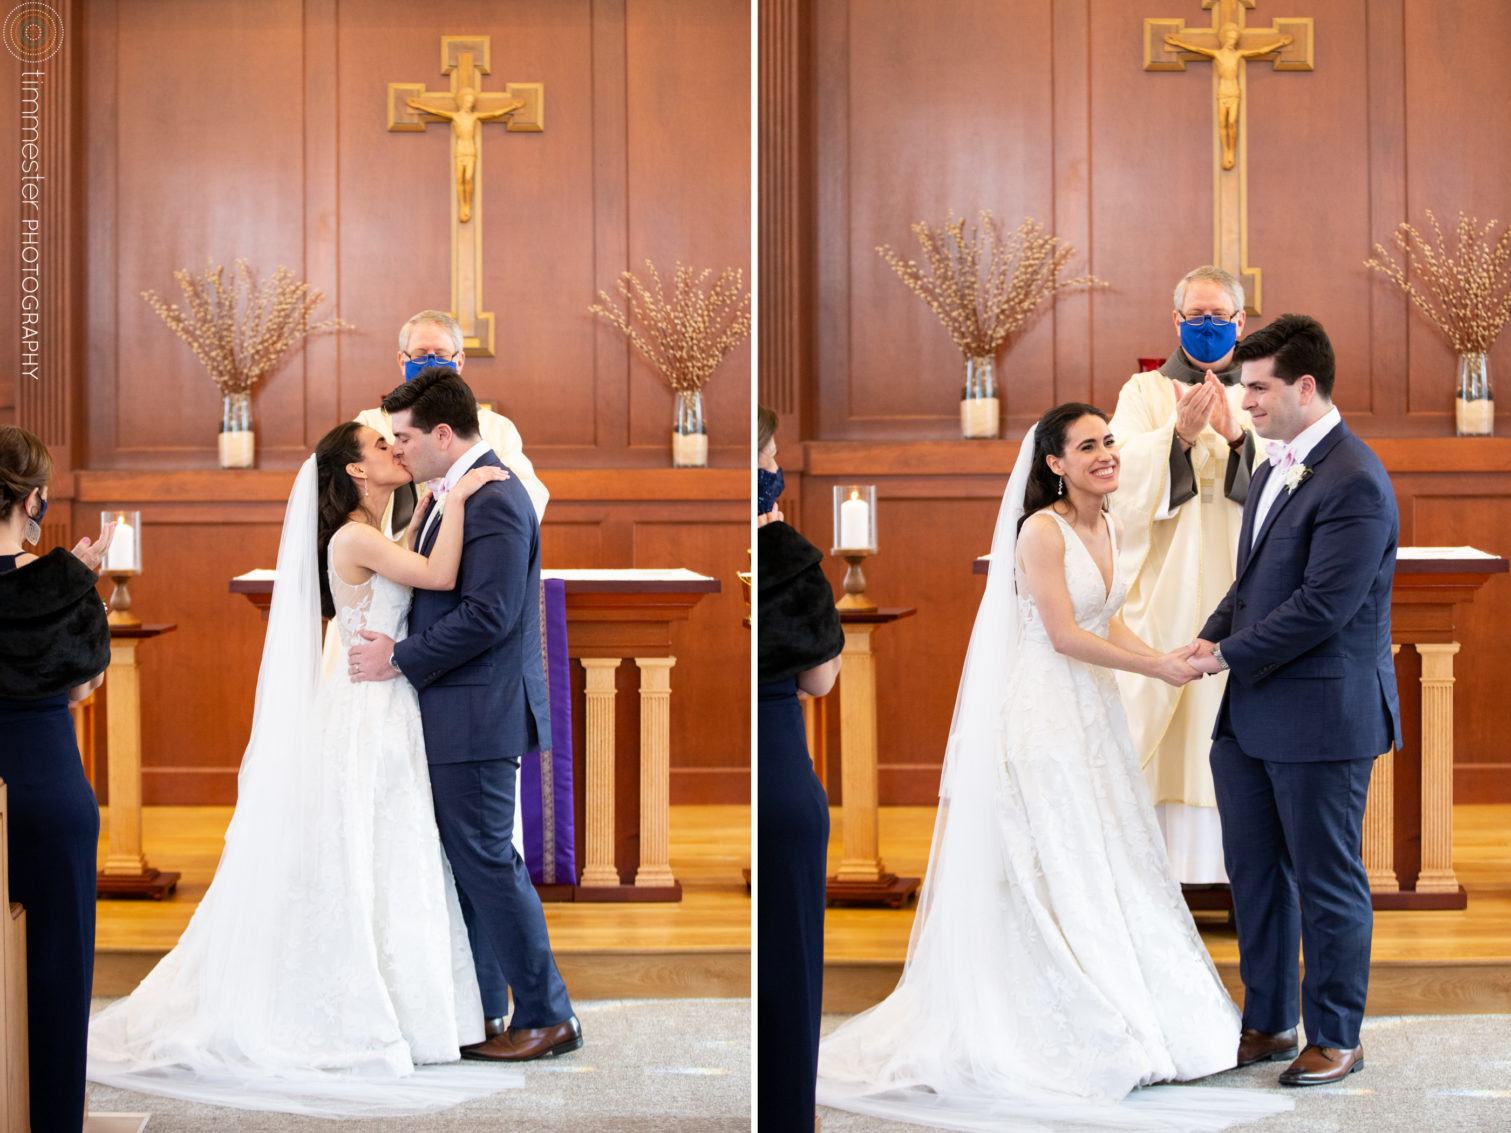 Wedding ceremony at St Thomas More Church in Chapel Hill, NC